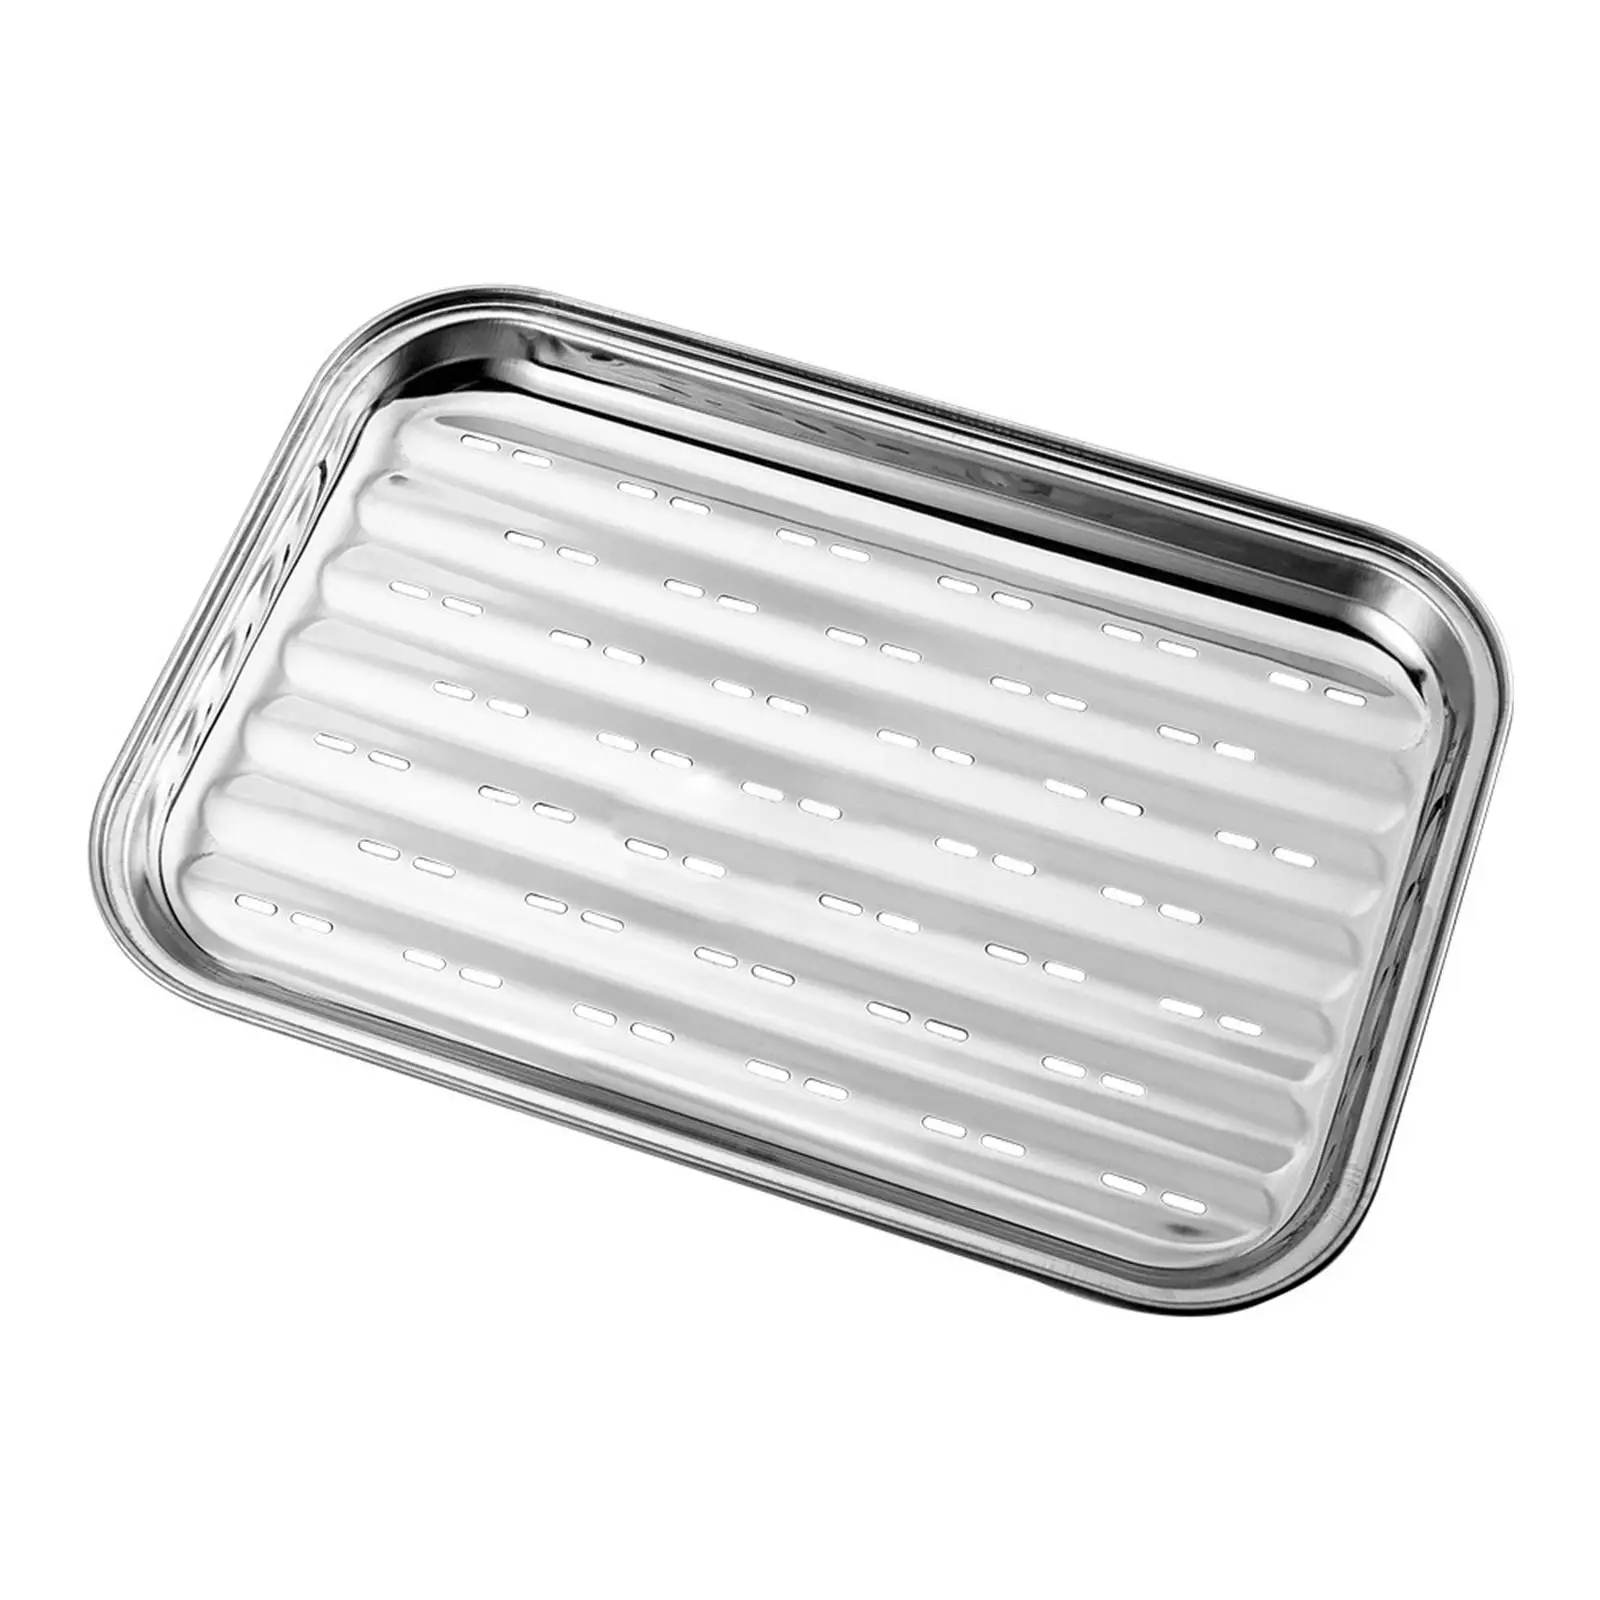 Grill Basket Roasting Pan Nonstick Grill Pans for Indoor Outdoor Kitchen BBQ